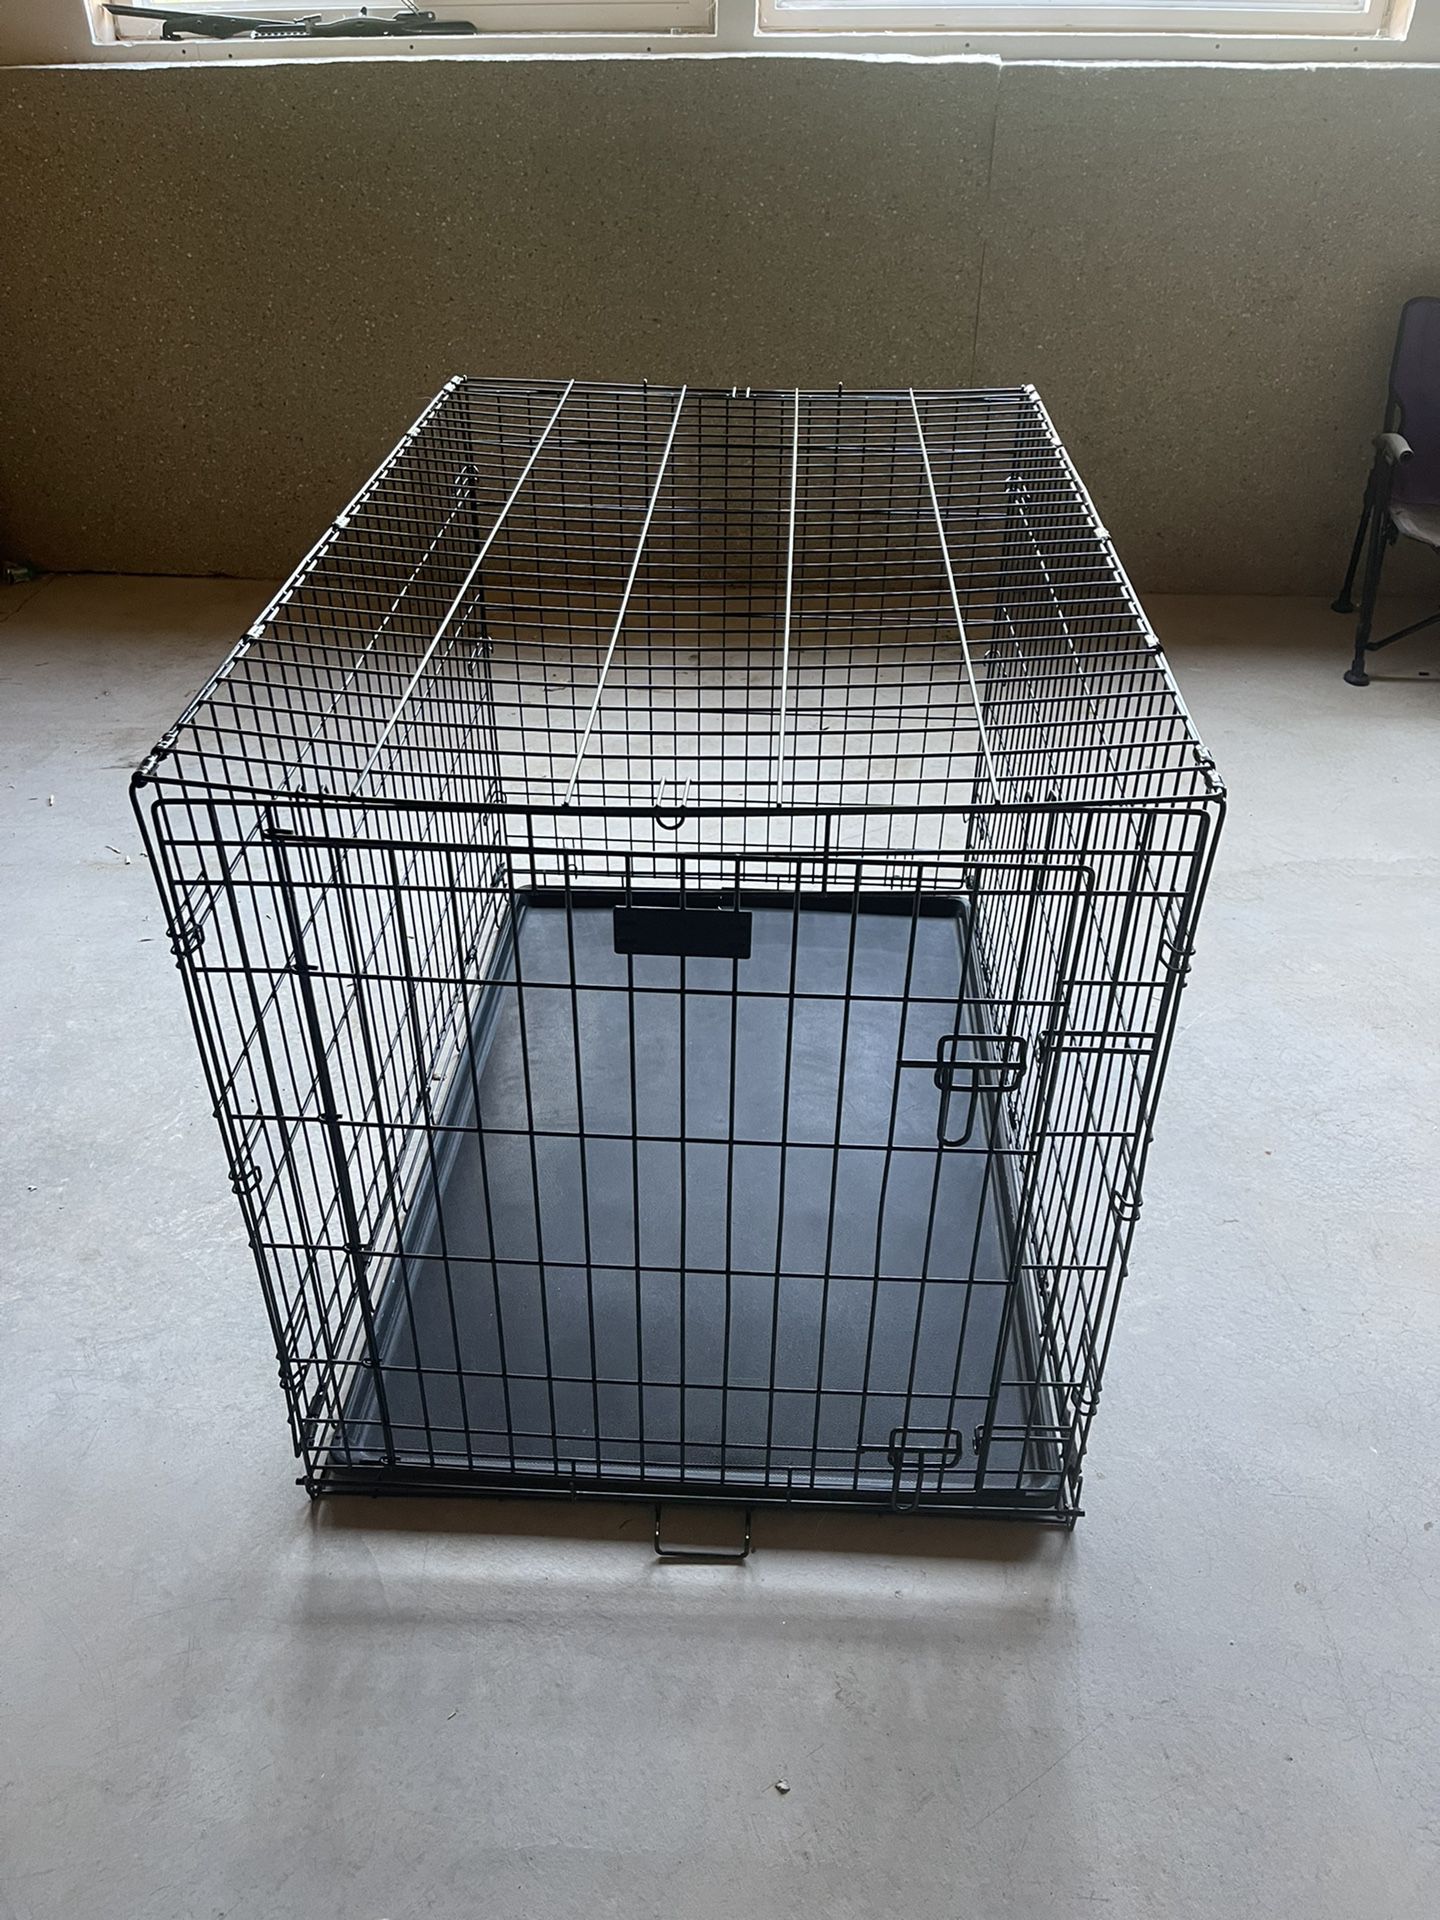 Dog Crate 42 x 28 x 30” with Cover 